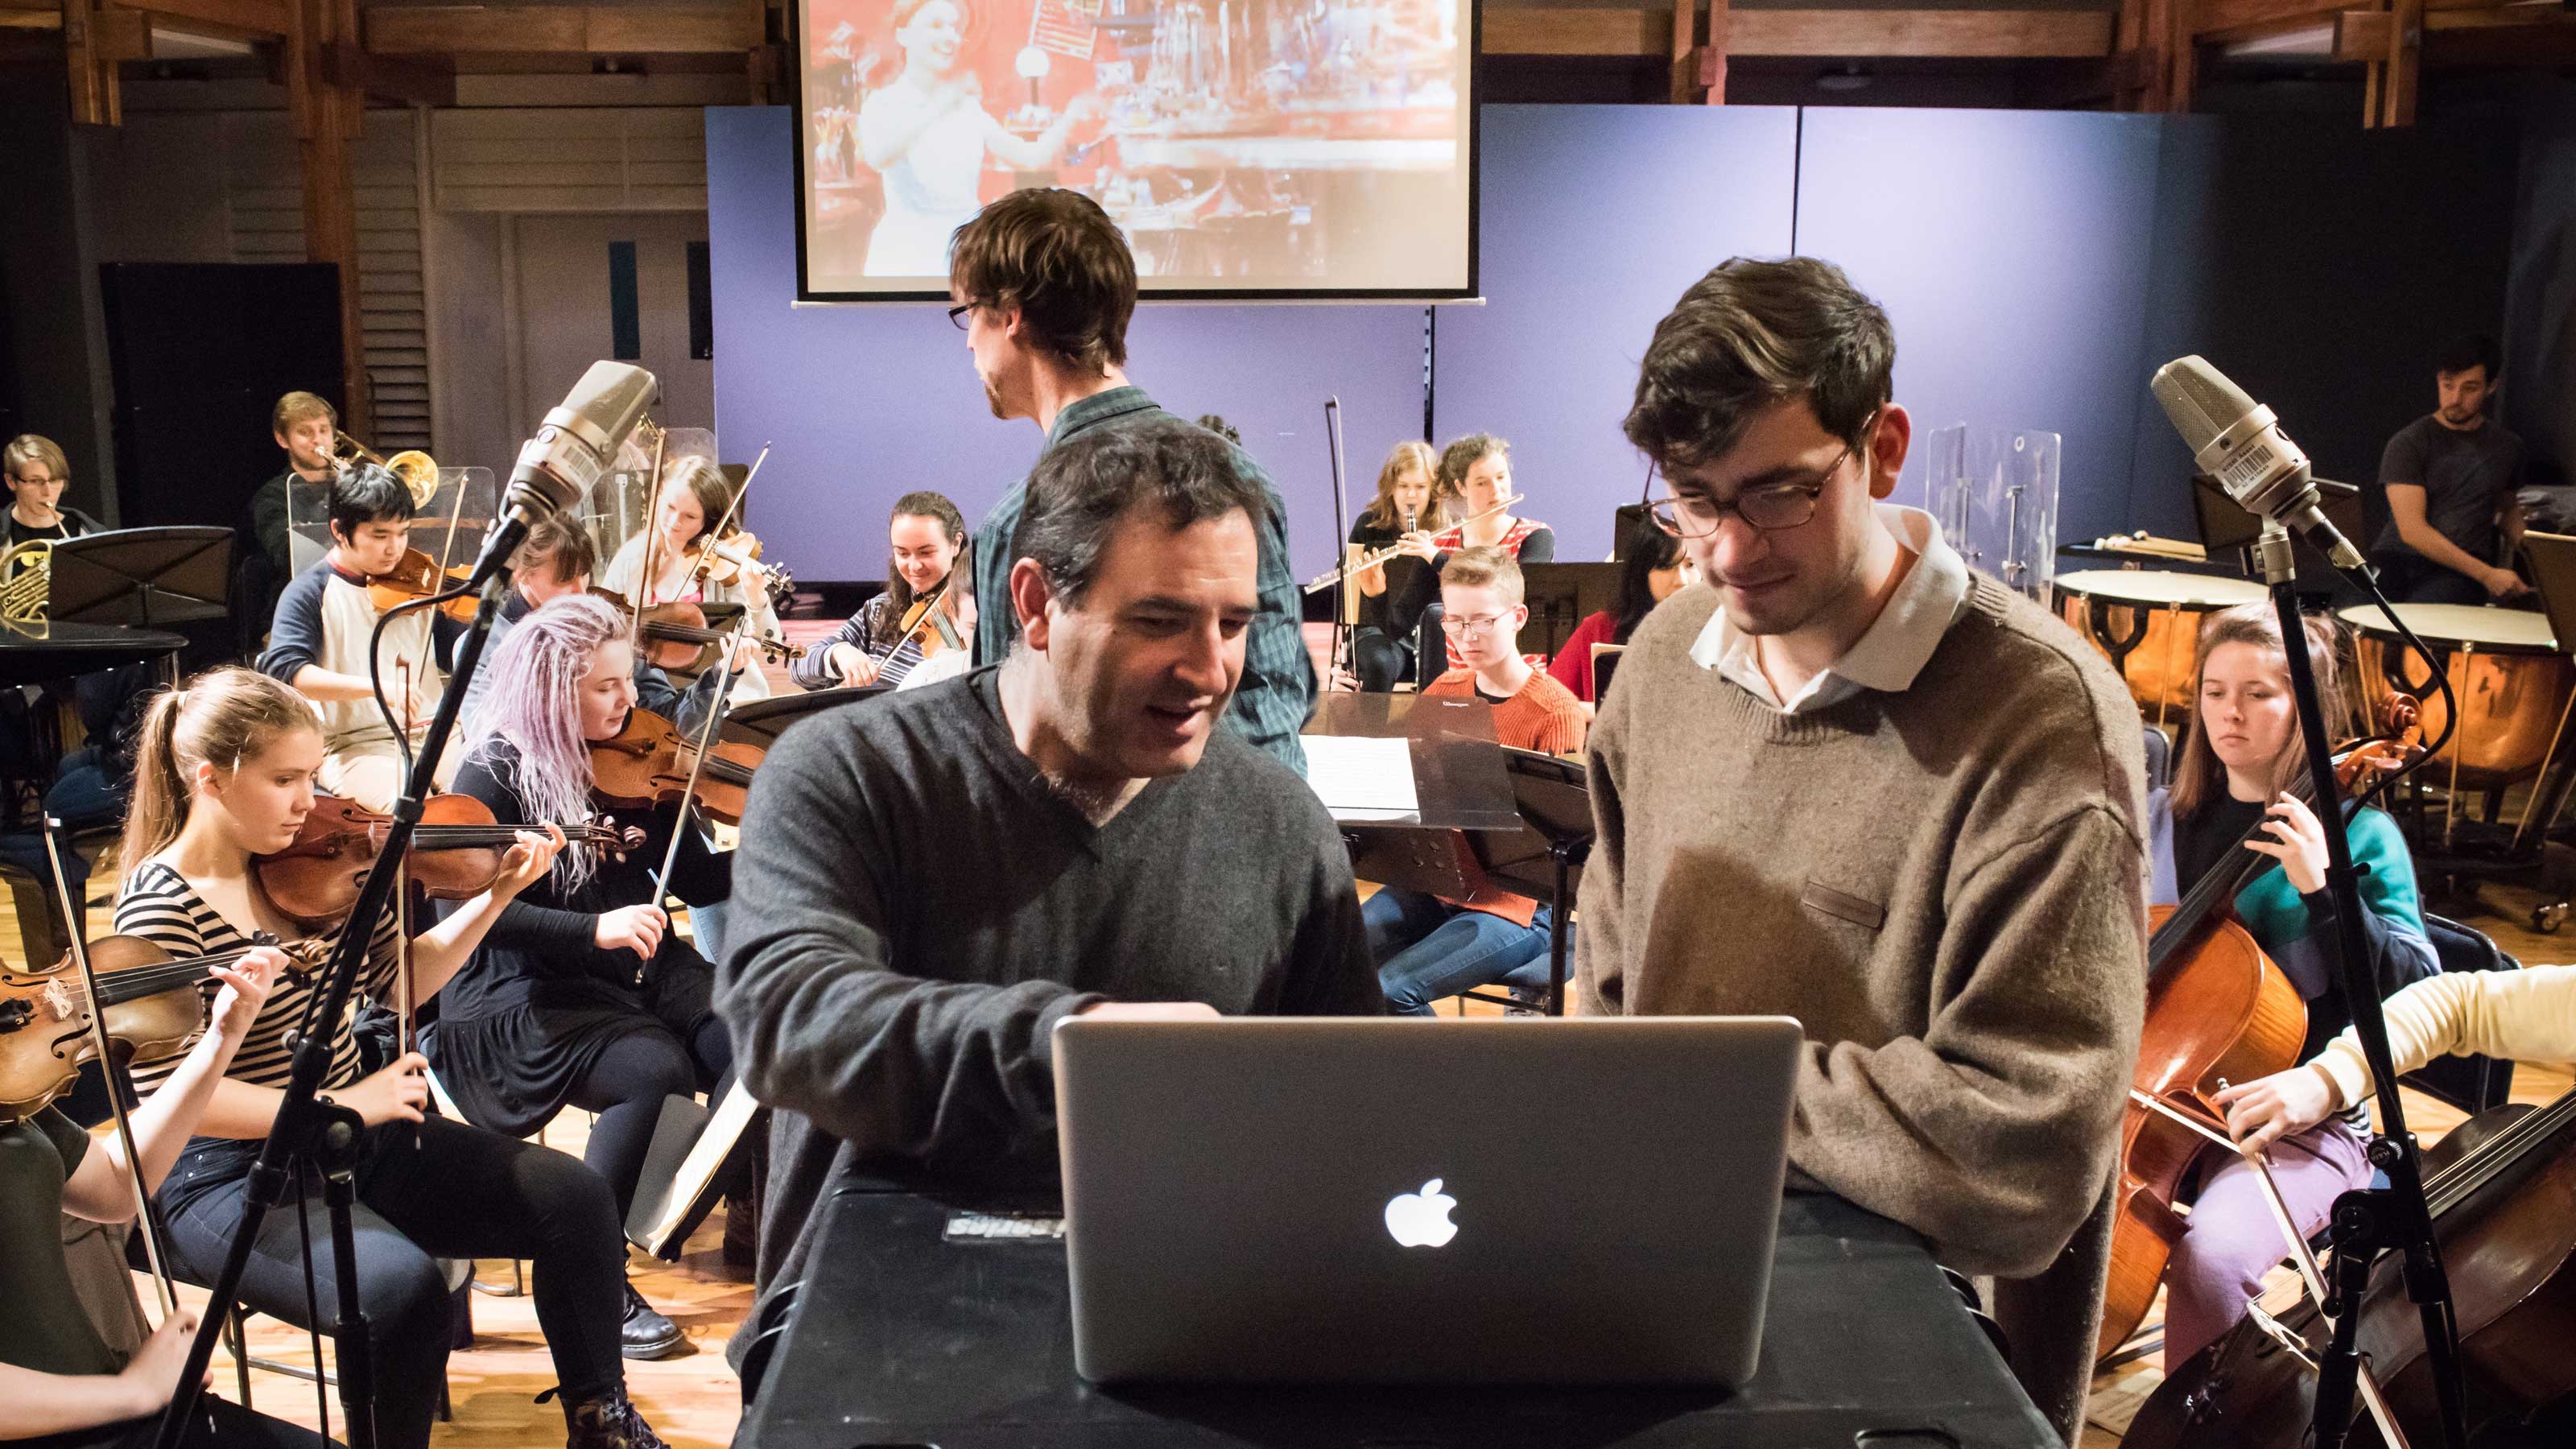 john Psathas and students – two men in the foreground look at a laptop while others play classical instruments in the background.